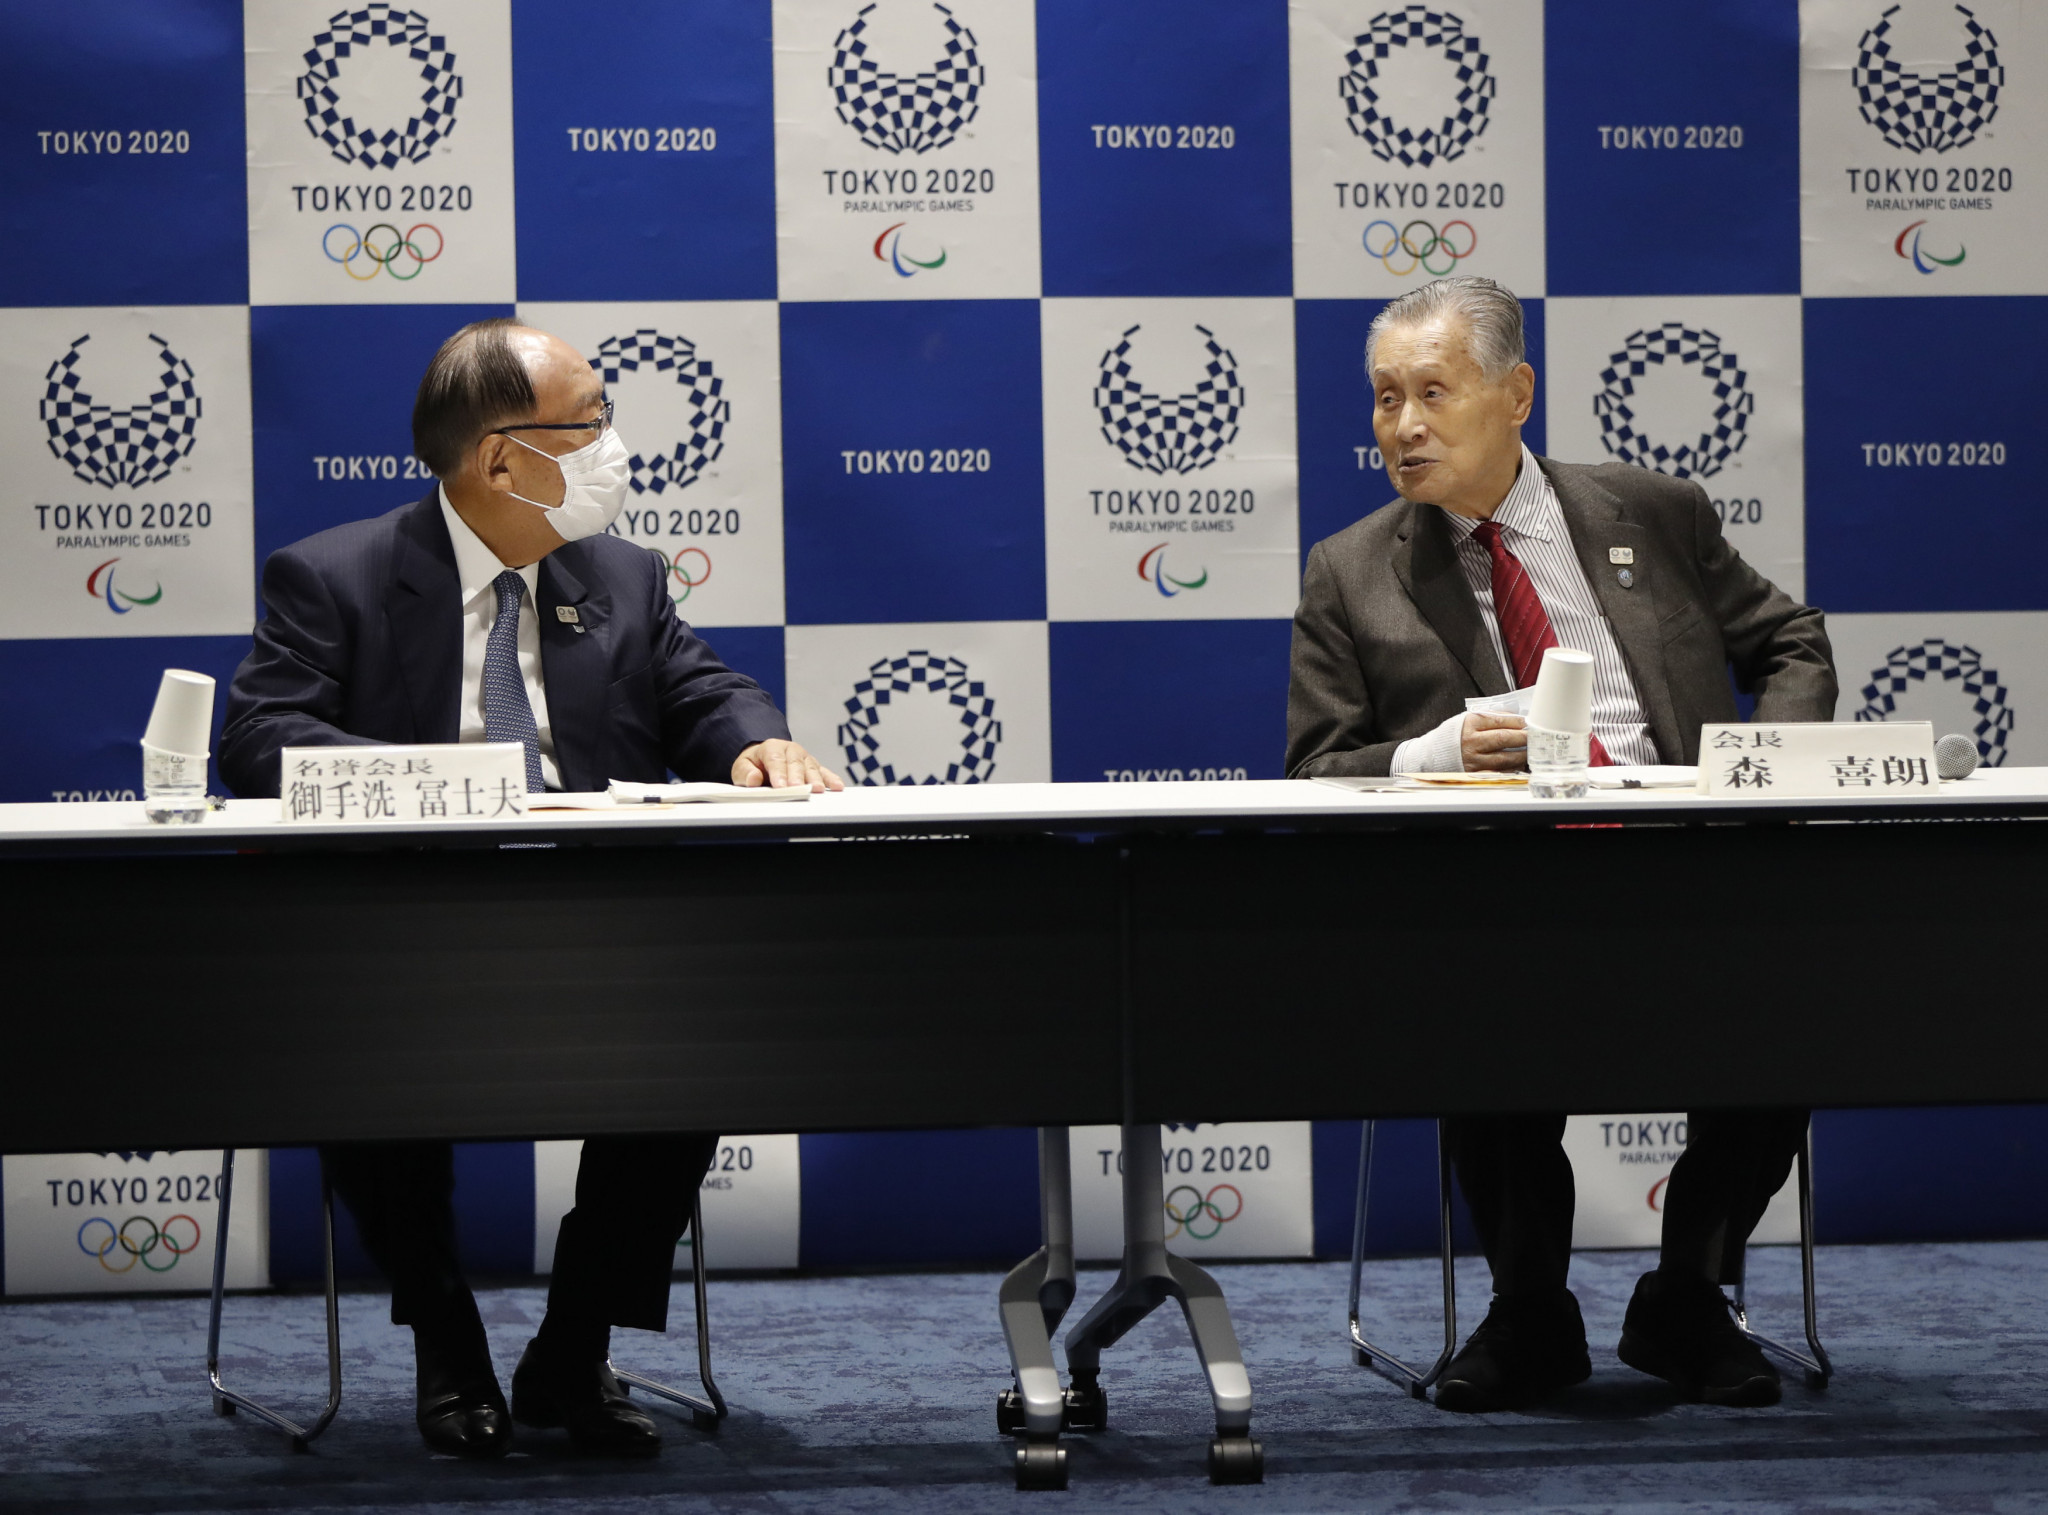 Postponement of the Tokyo 2020 Olympics and Paralympics was announced last week ©Getty Images